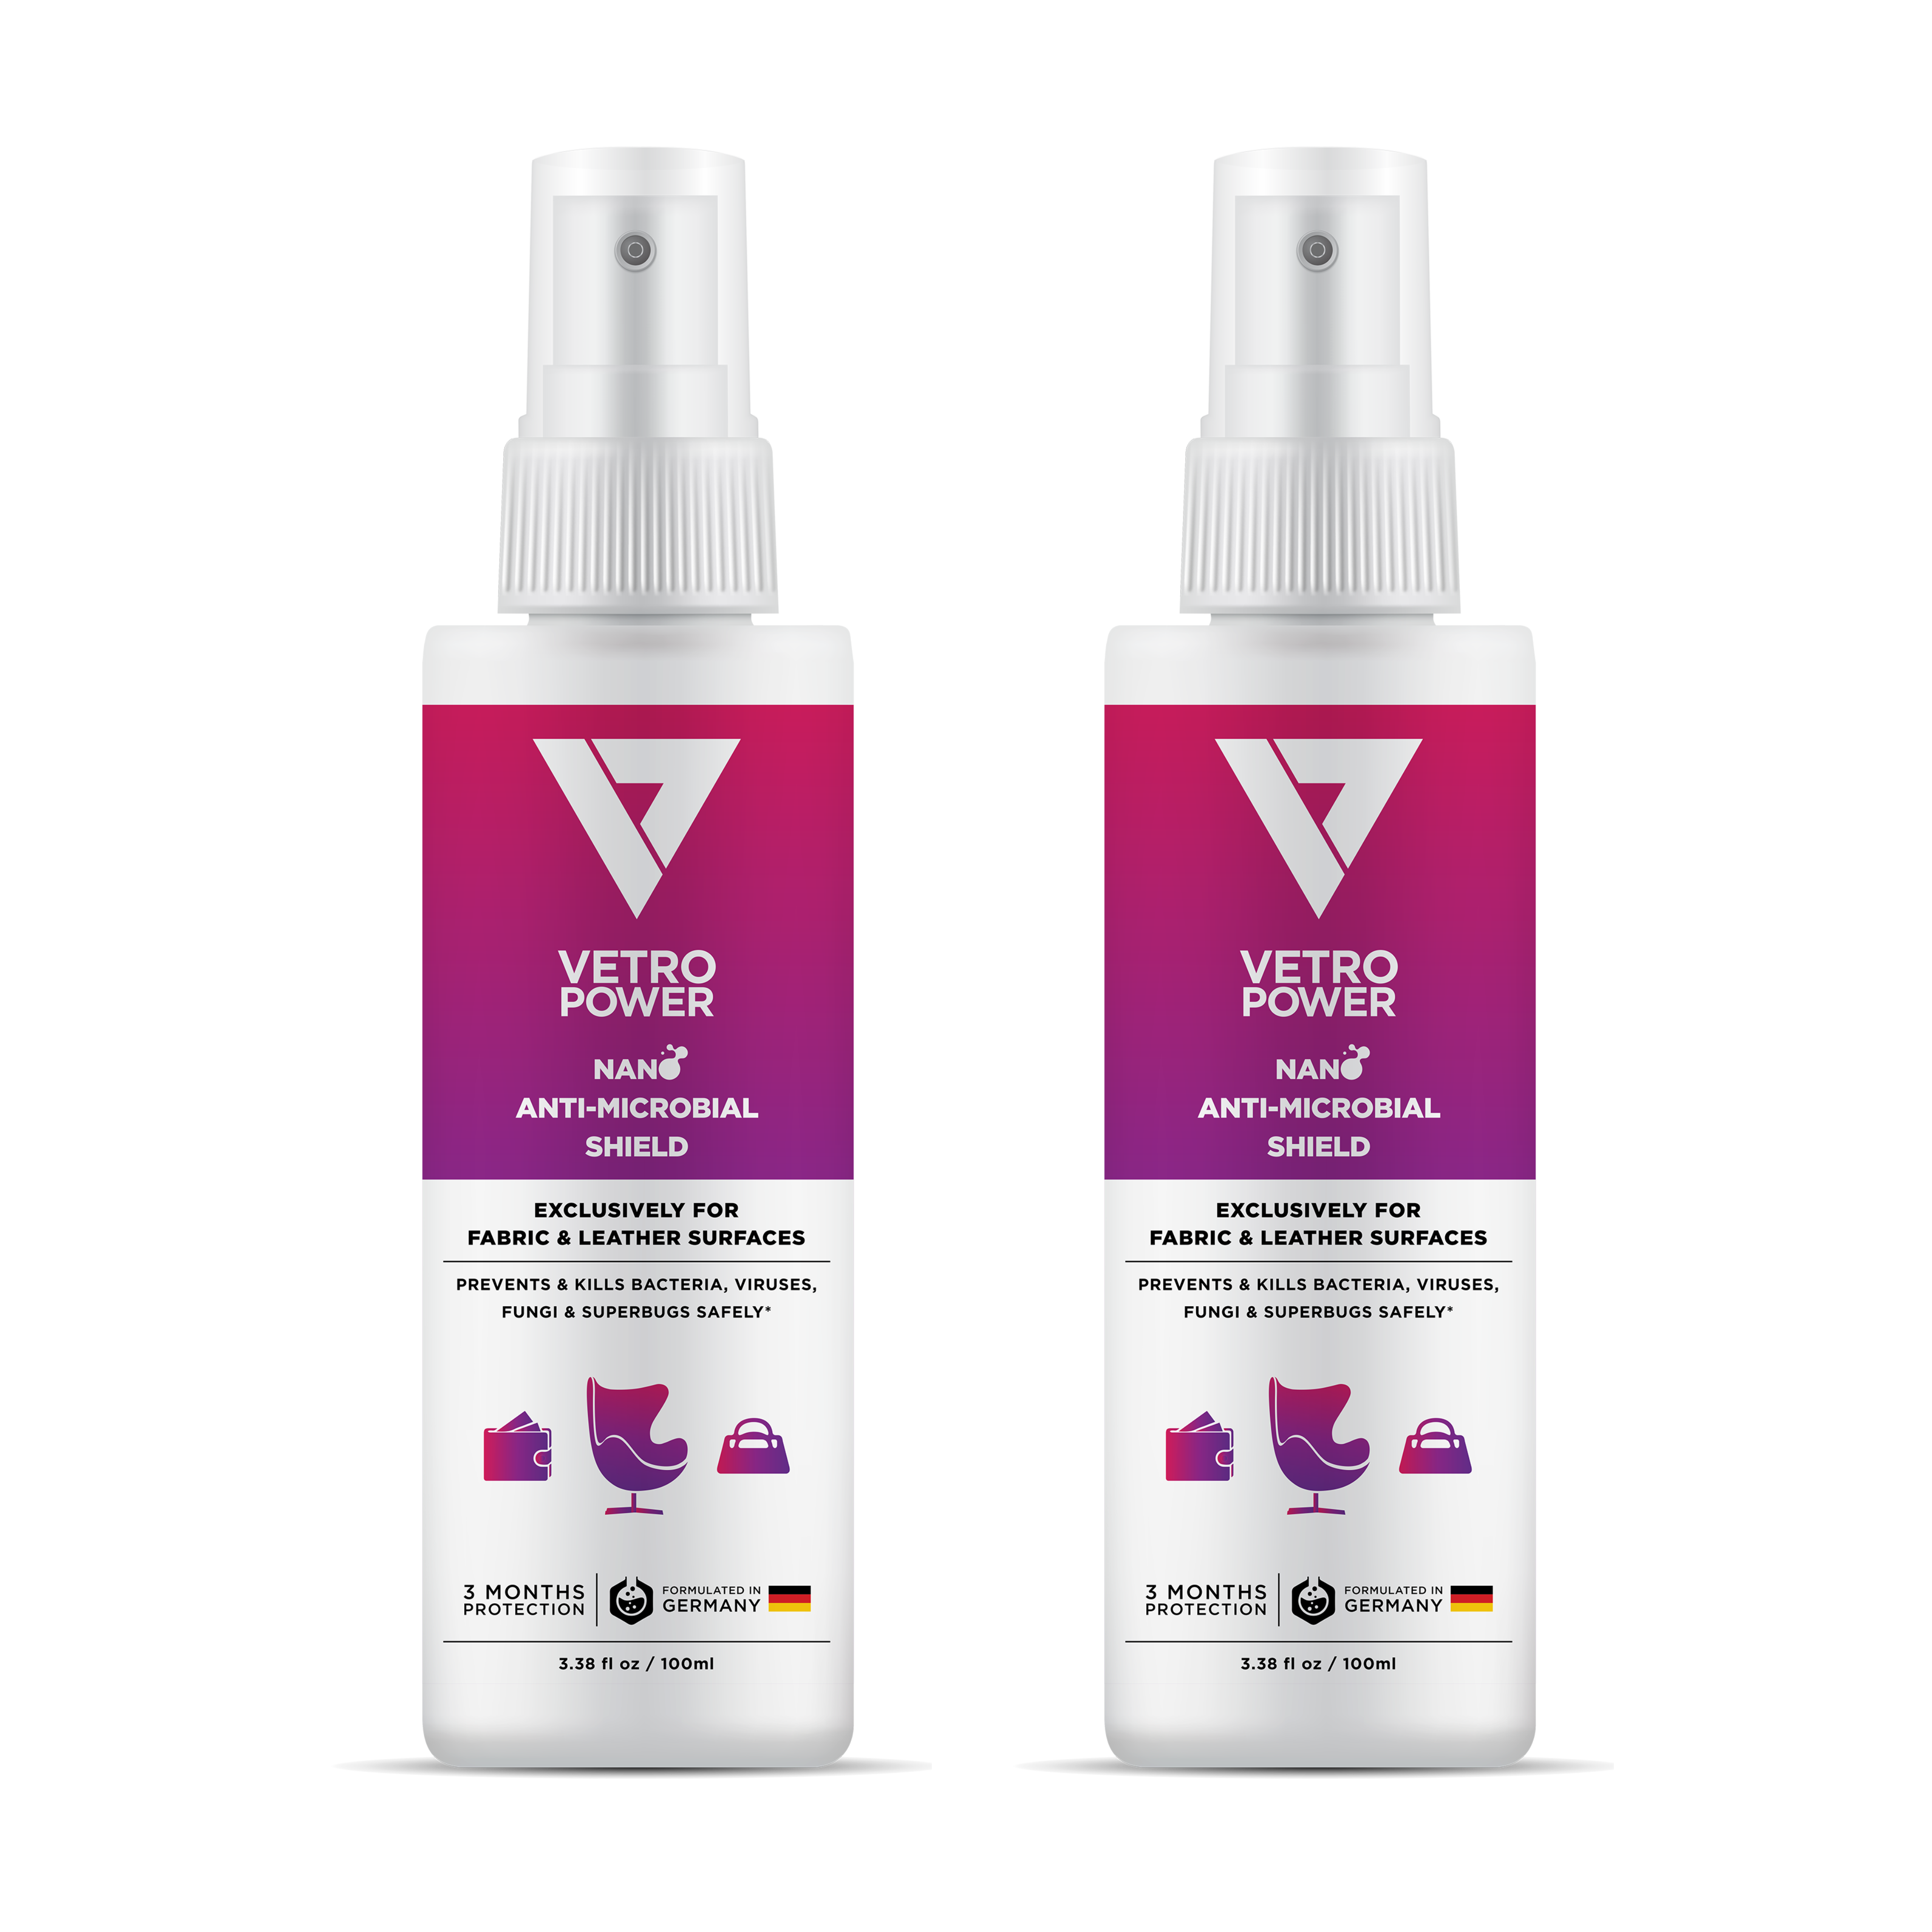 Vetro Power Nano Anti-Microbial Shield for Fabric & Leather Surfaces 100ml - (Pack of 2)